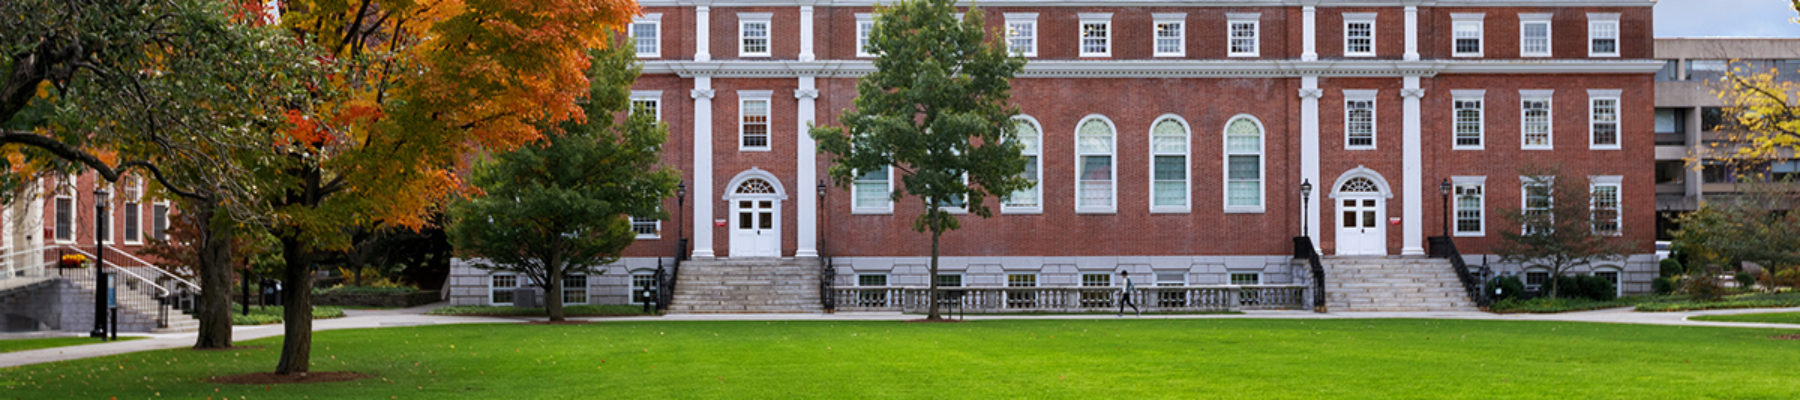 Image of Murdock Hall on the HGSE campus.